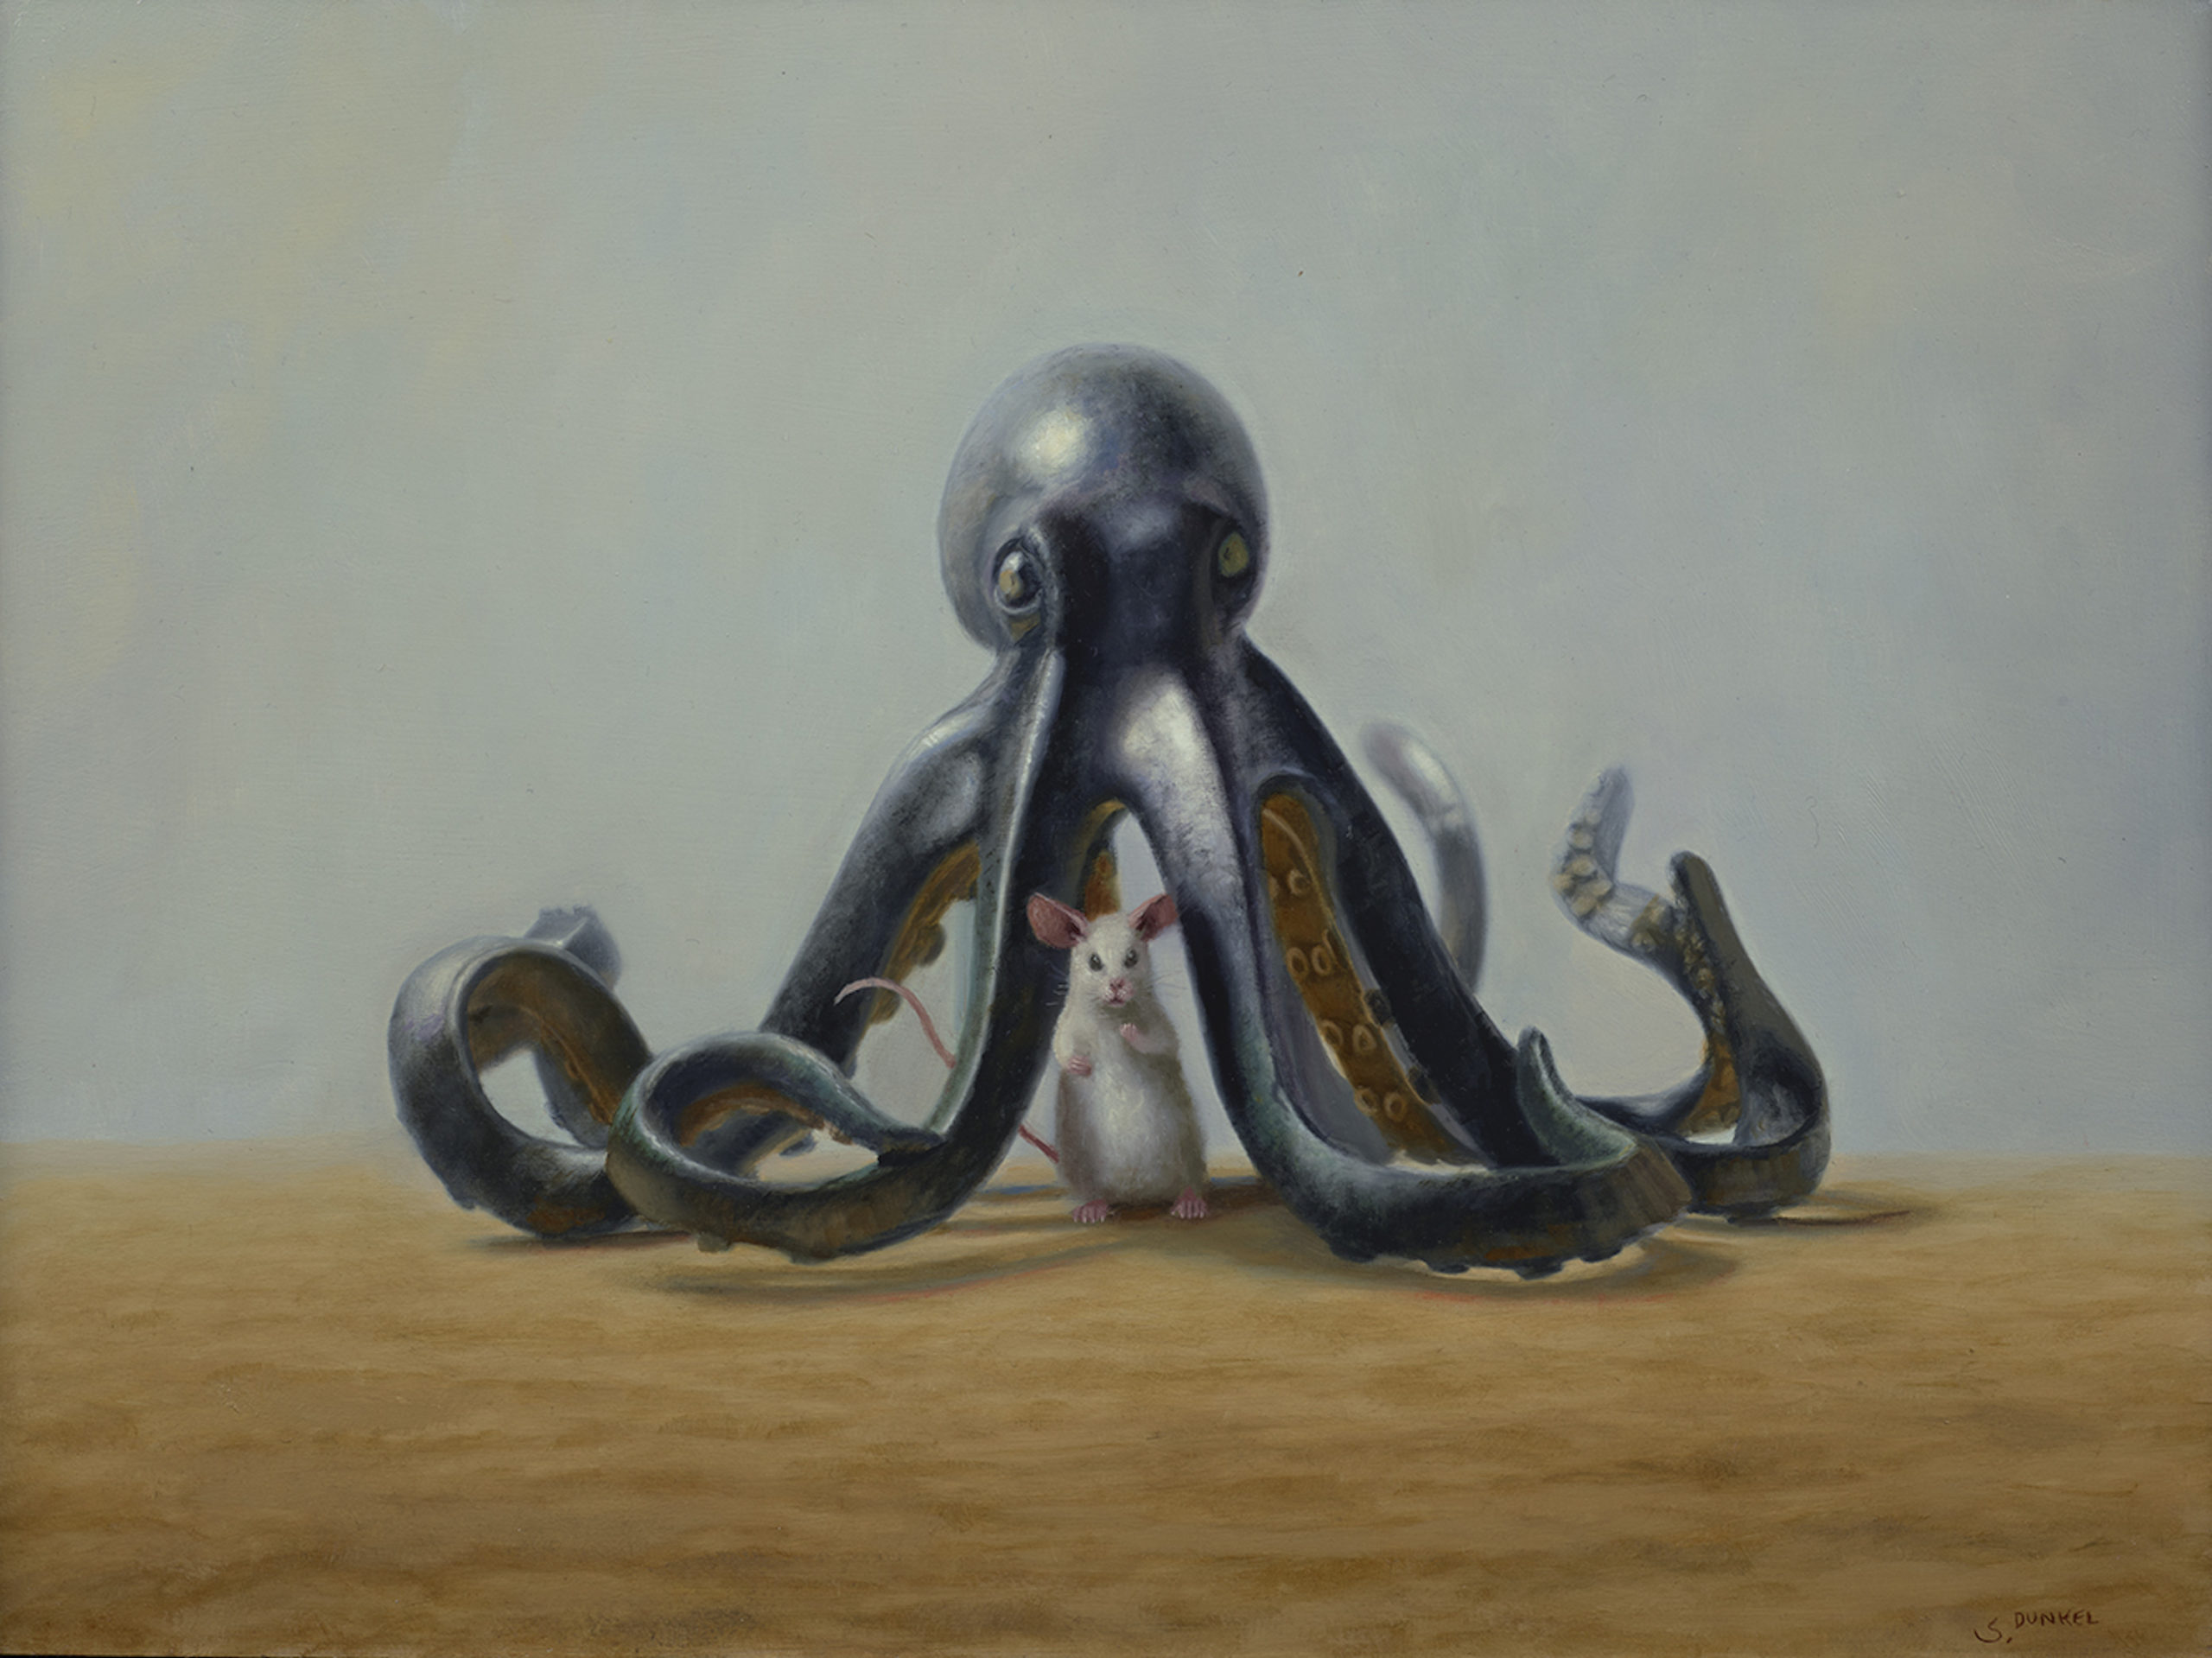 Protector by Stuart Dunkel, Oil on Panel, 12 x 16 in.; Rehs Contemporary Galleries, Inc.